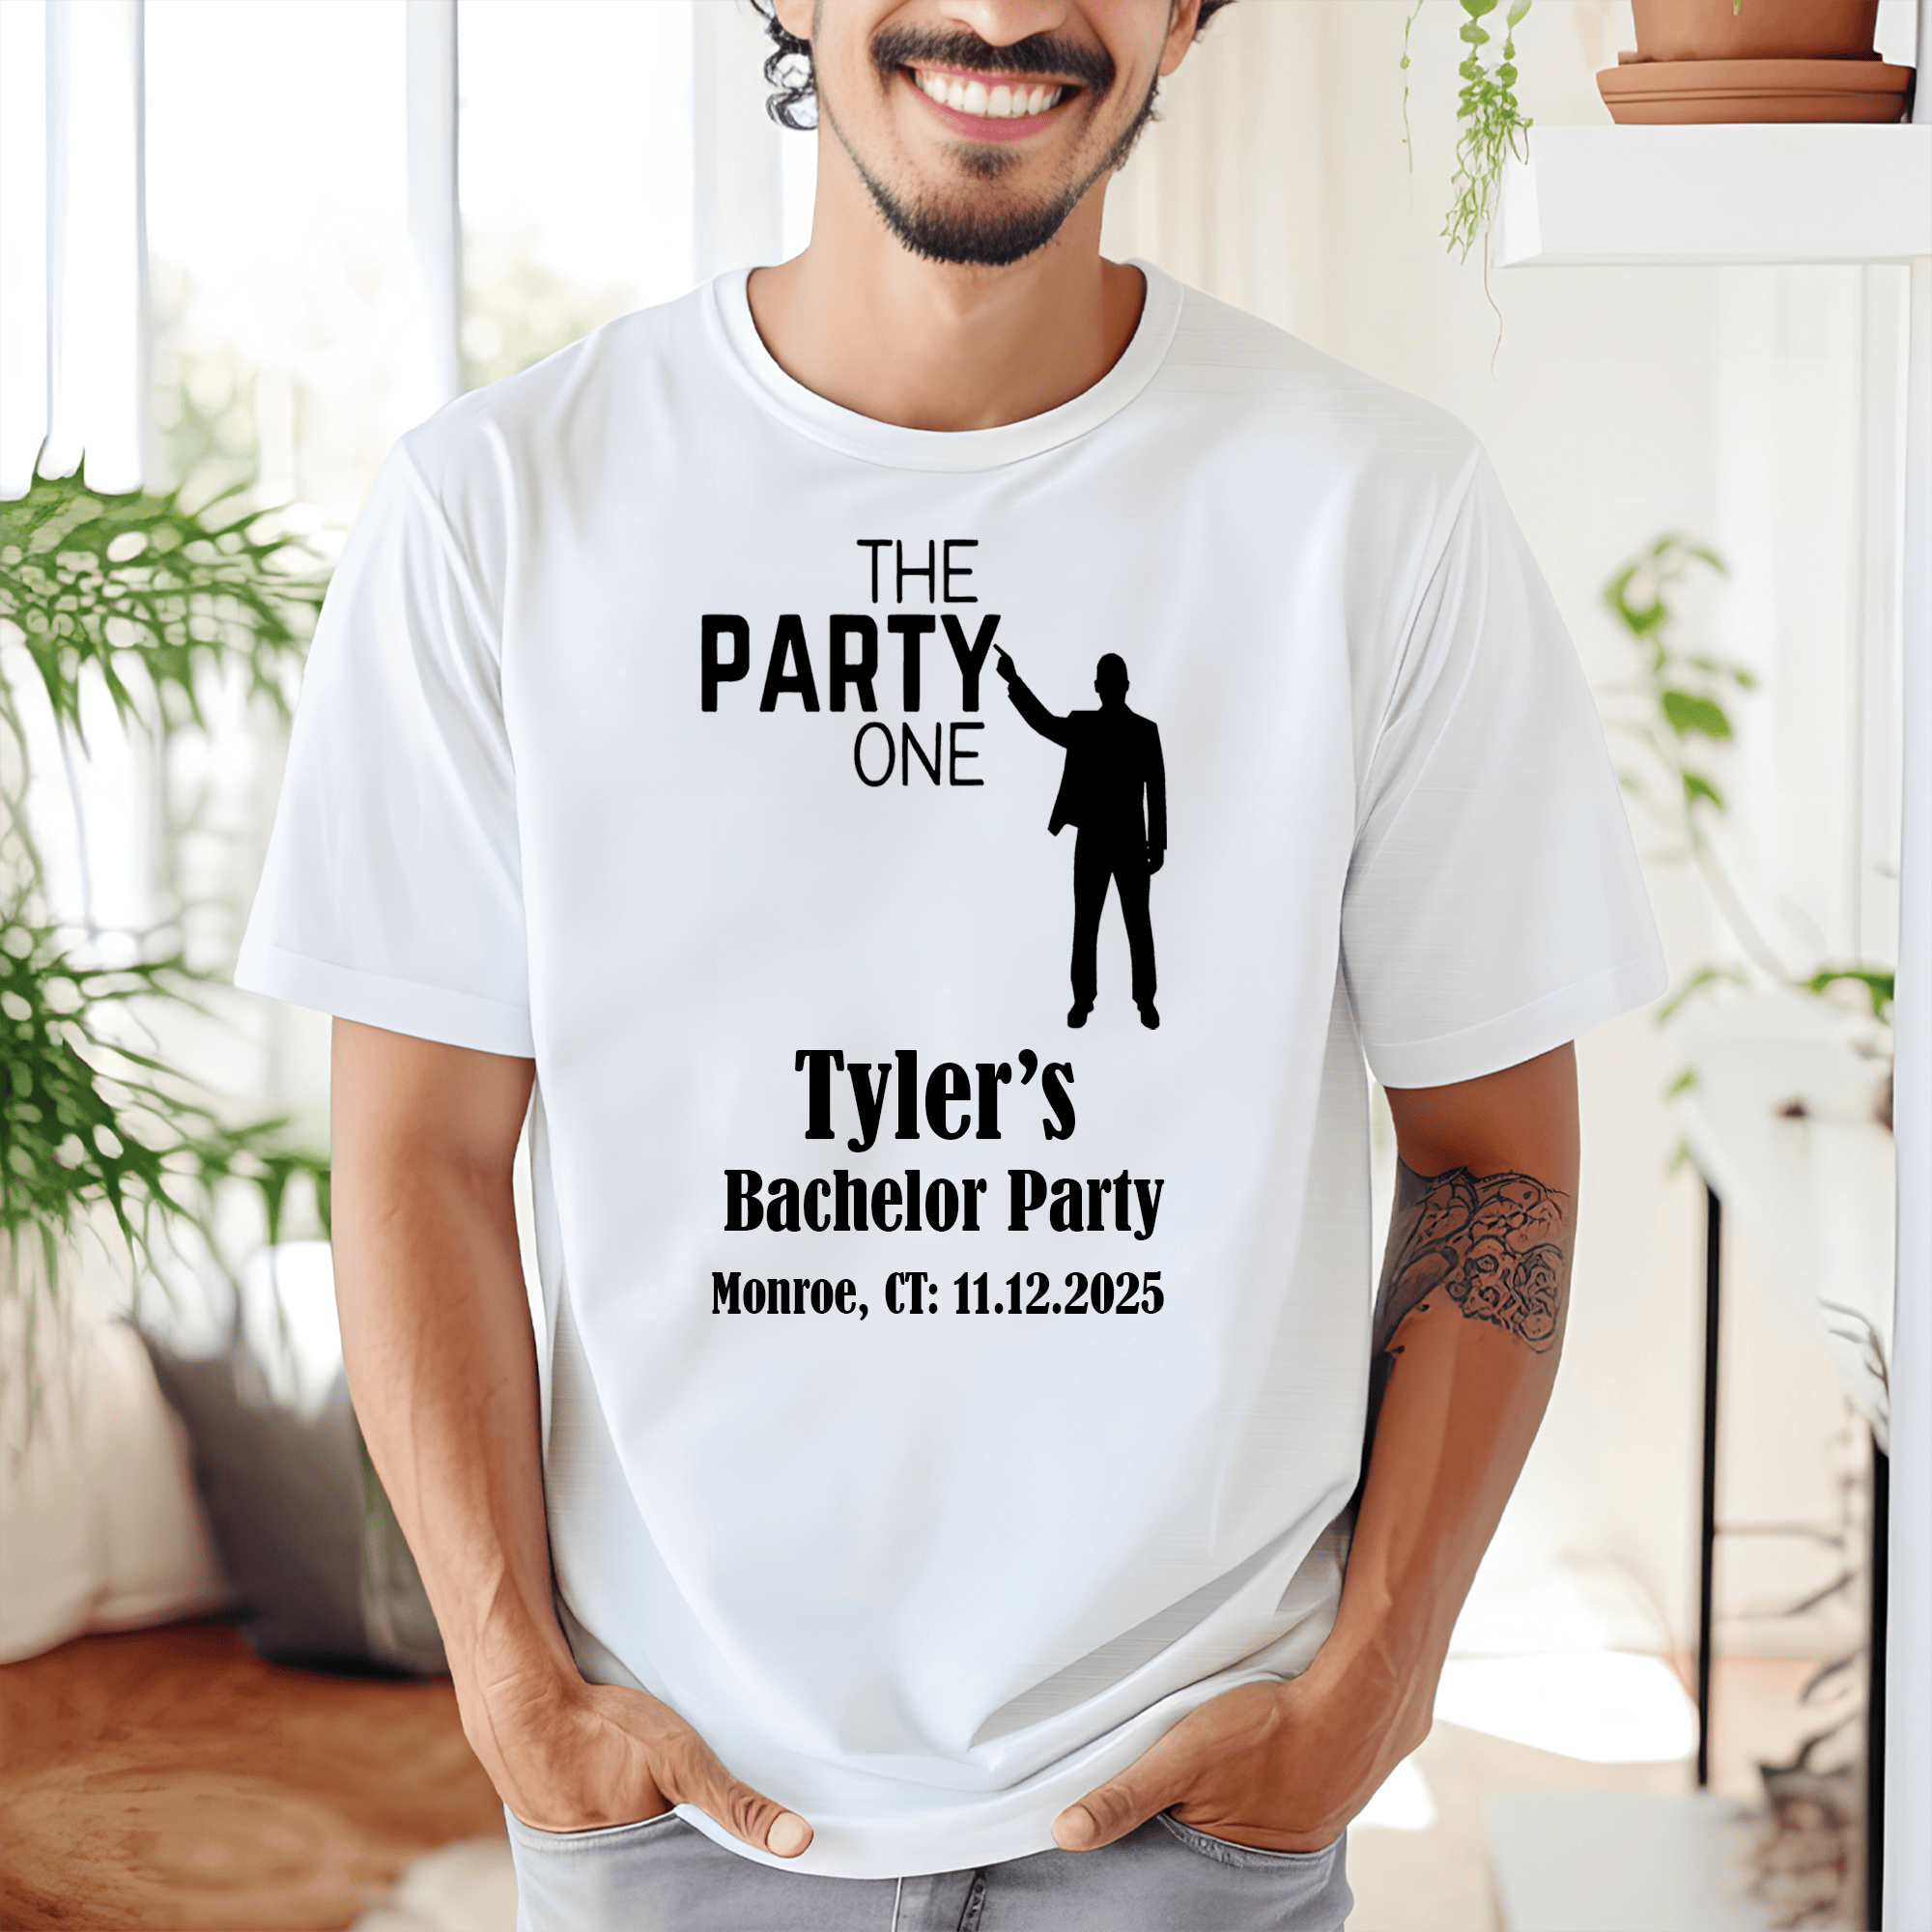 Grey Mens T-Shirt With The Party One Design